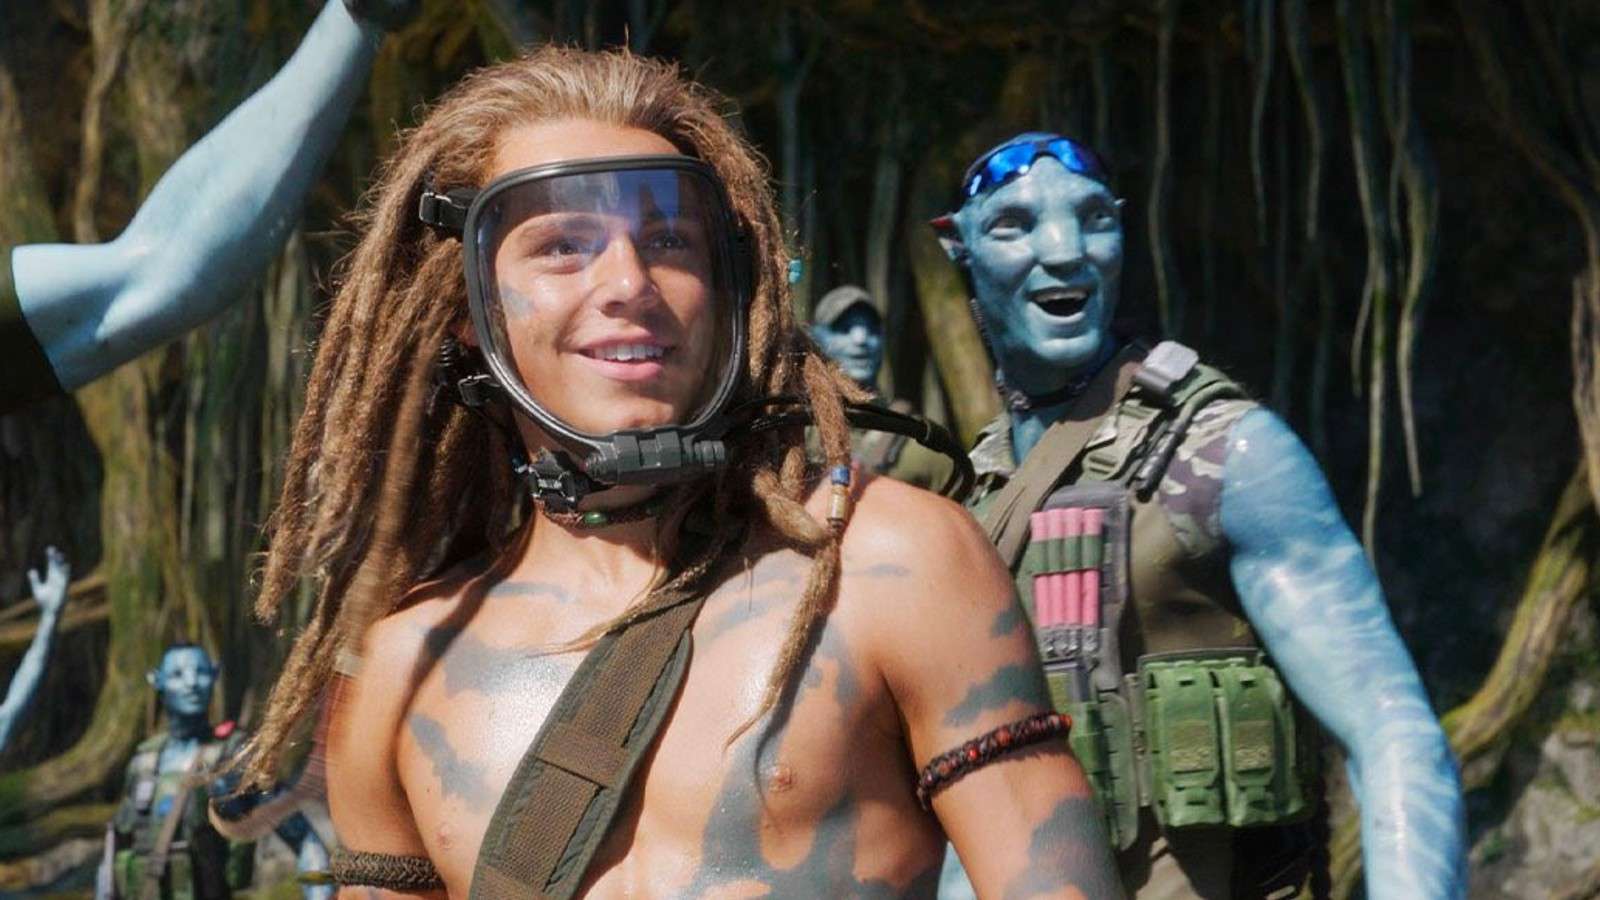 Jack Champion as Spider in Avatar 2, The Way of Water